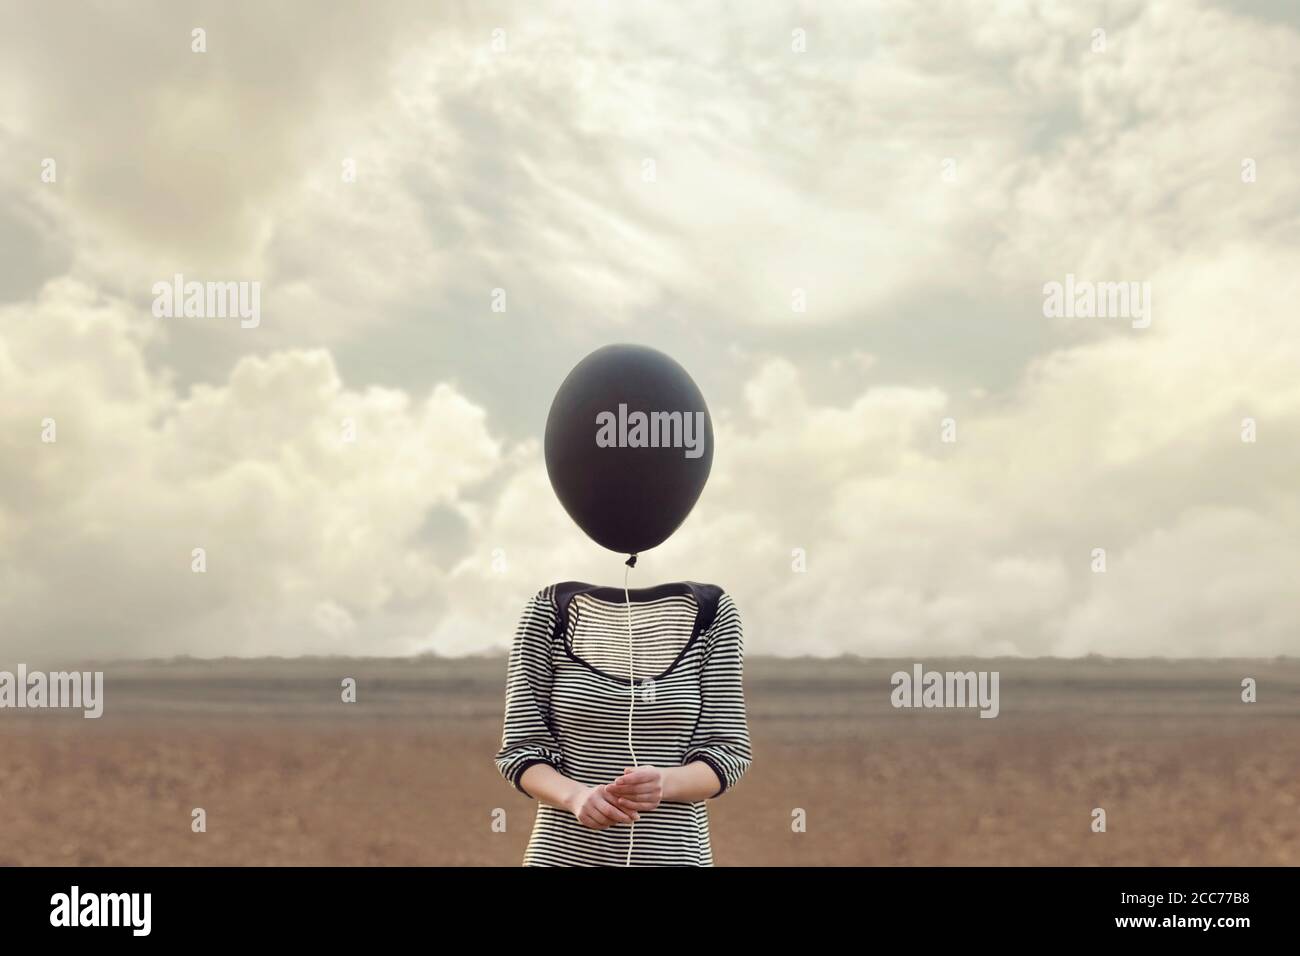 woman's head replaced by a black balloon Stock Photo